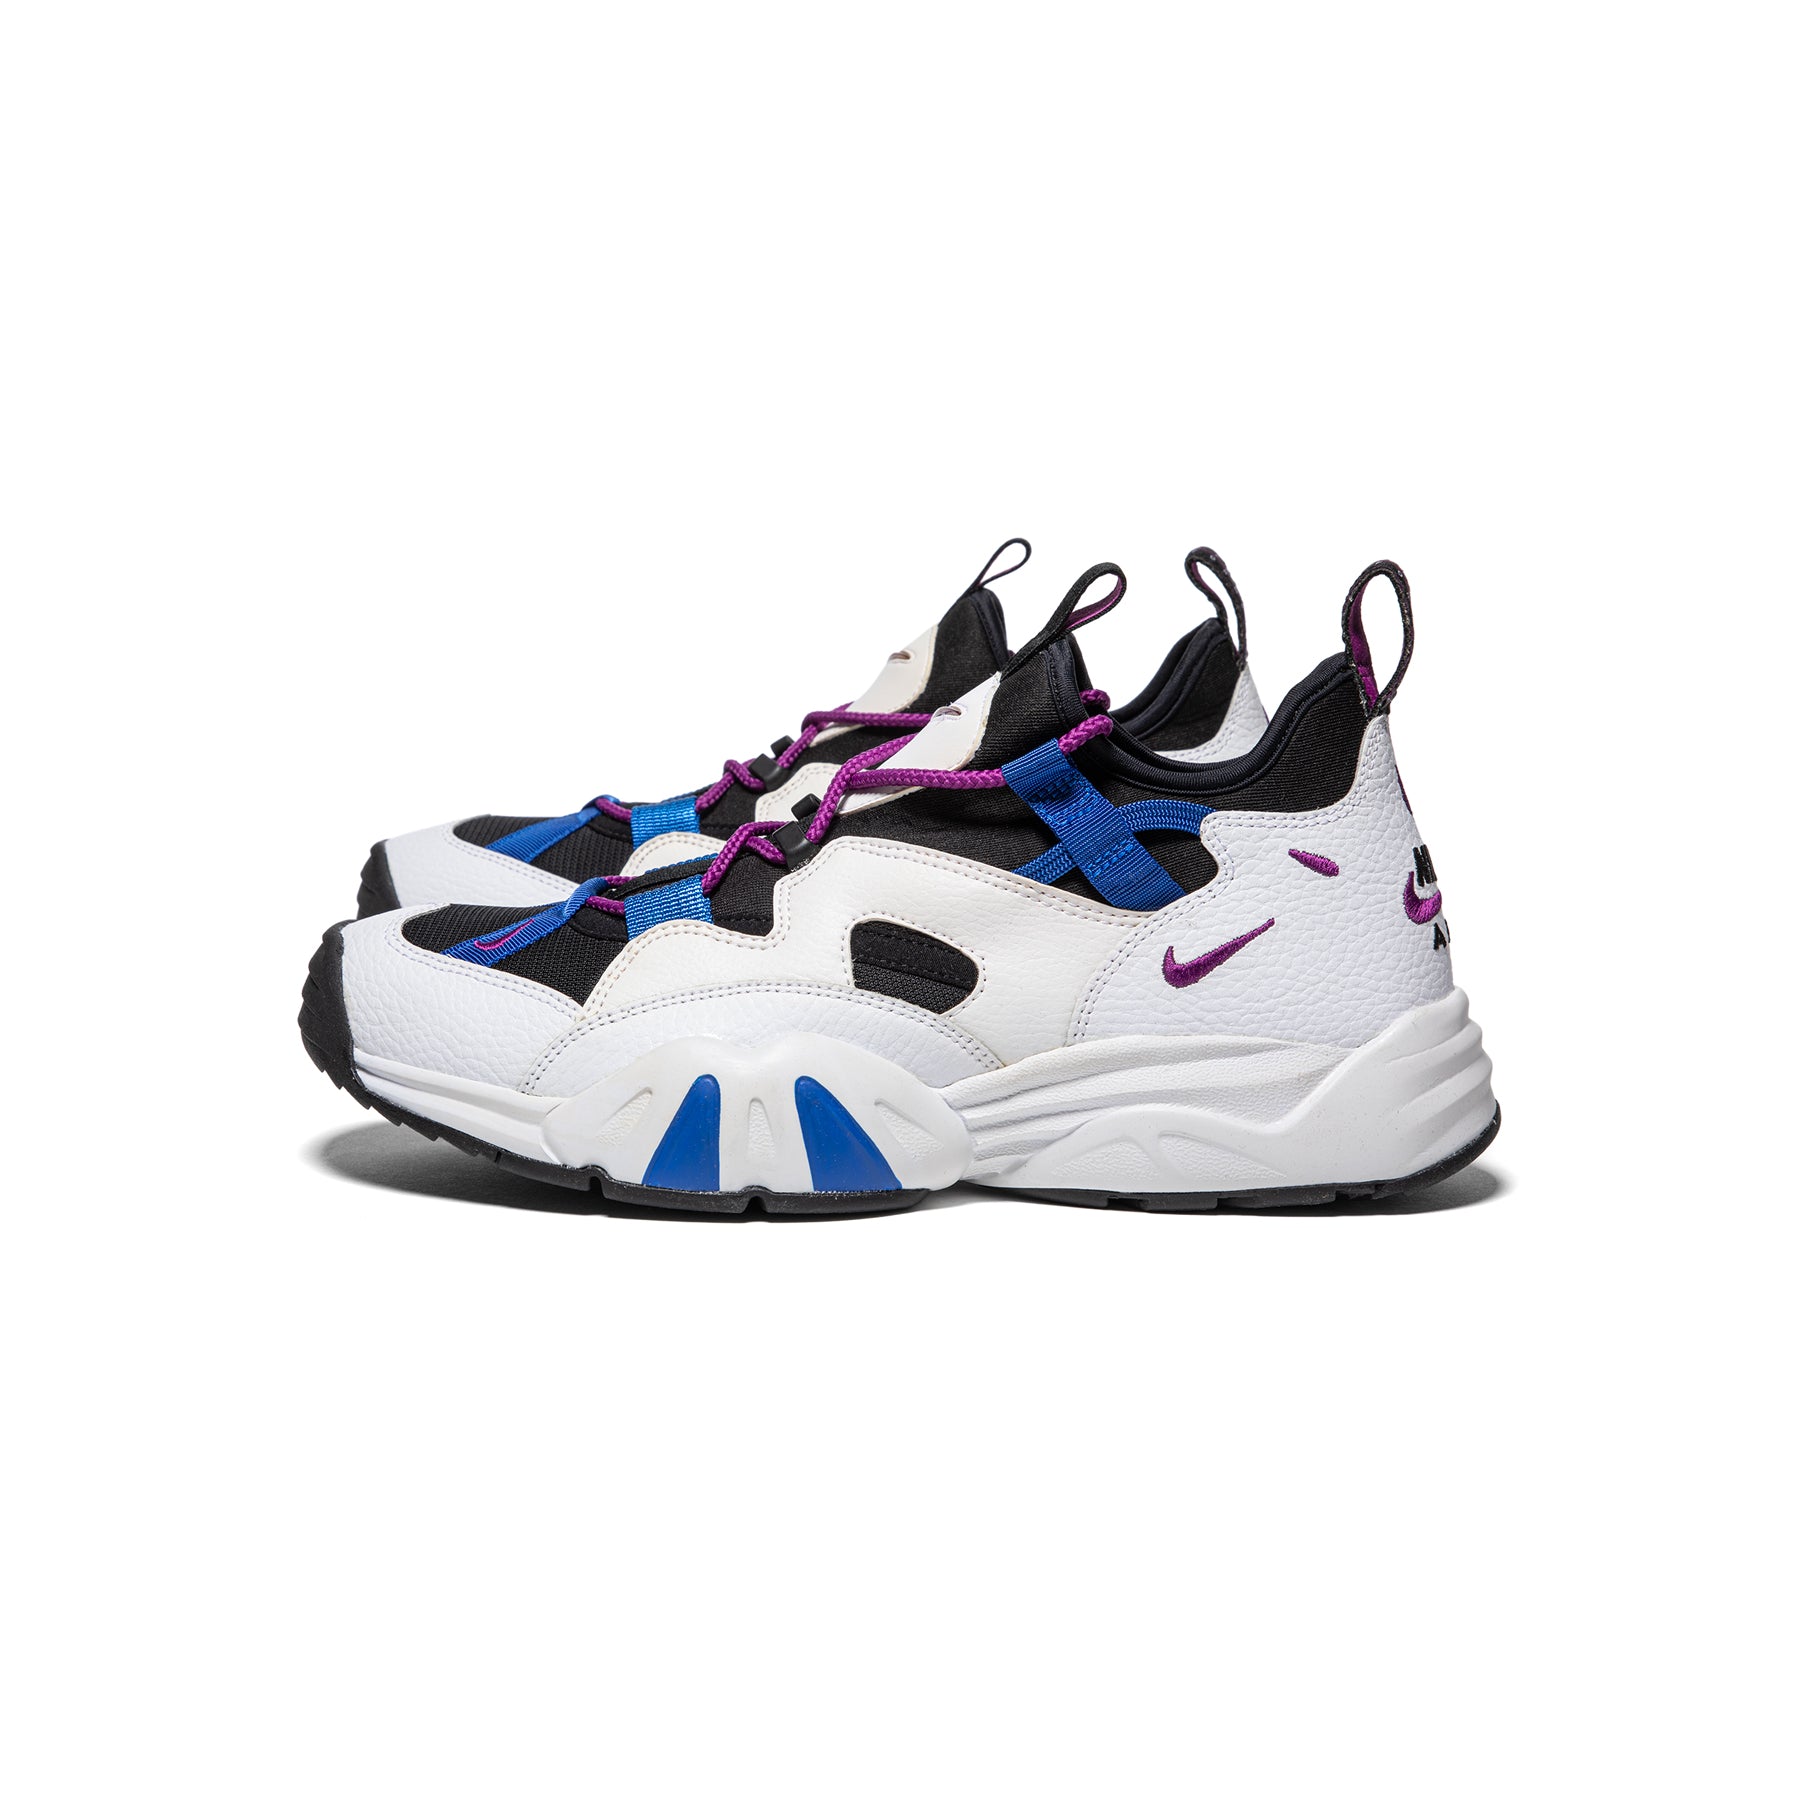 Blind Beringstraat dialect Nike Air Scream LWP (White/Bold Berry/Lyon Blue/Black) – Concepts